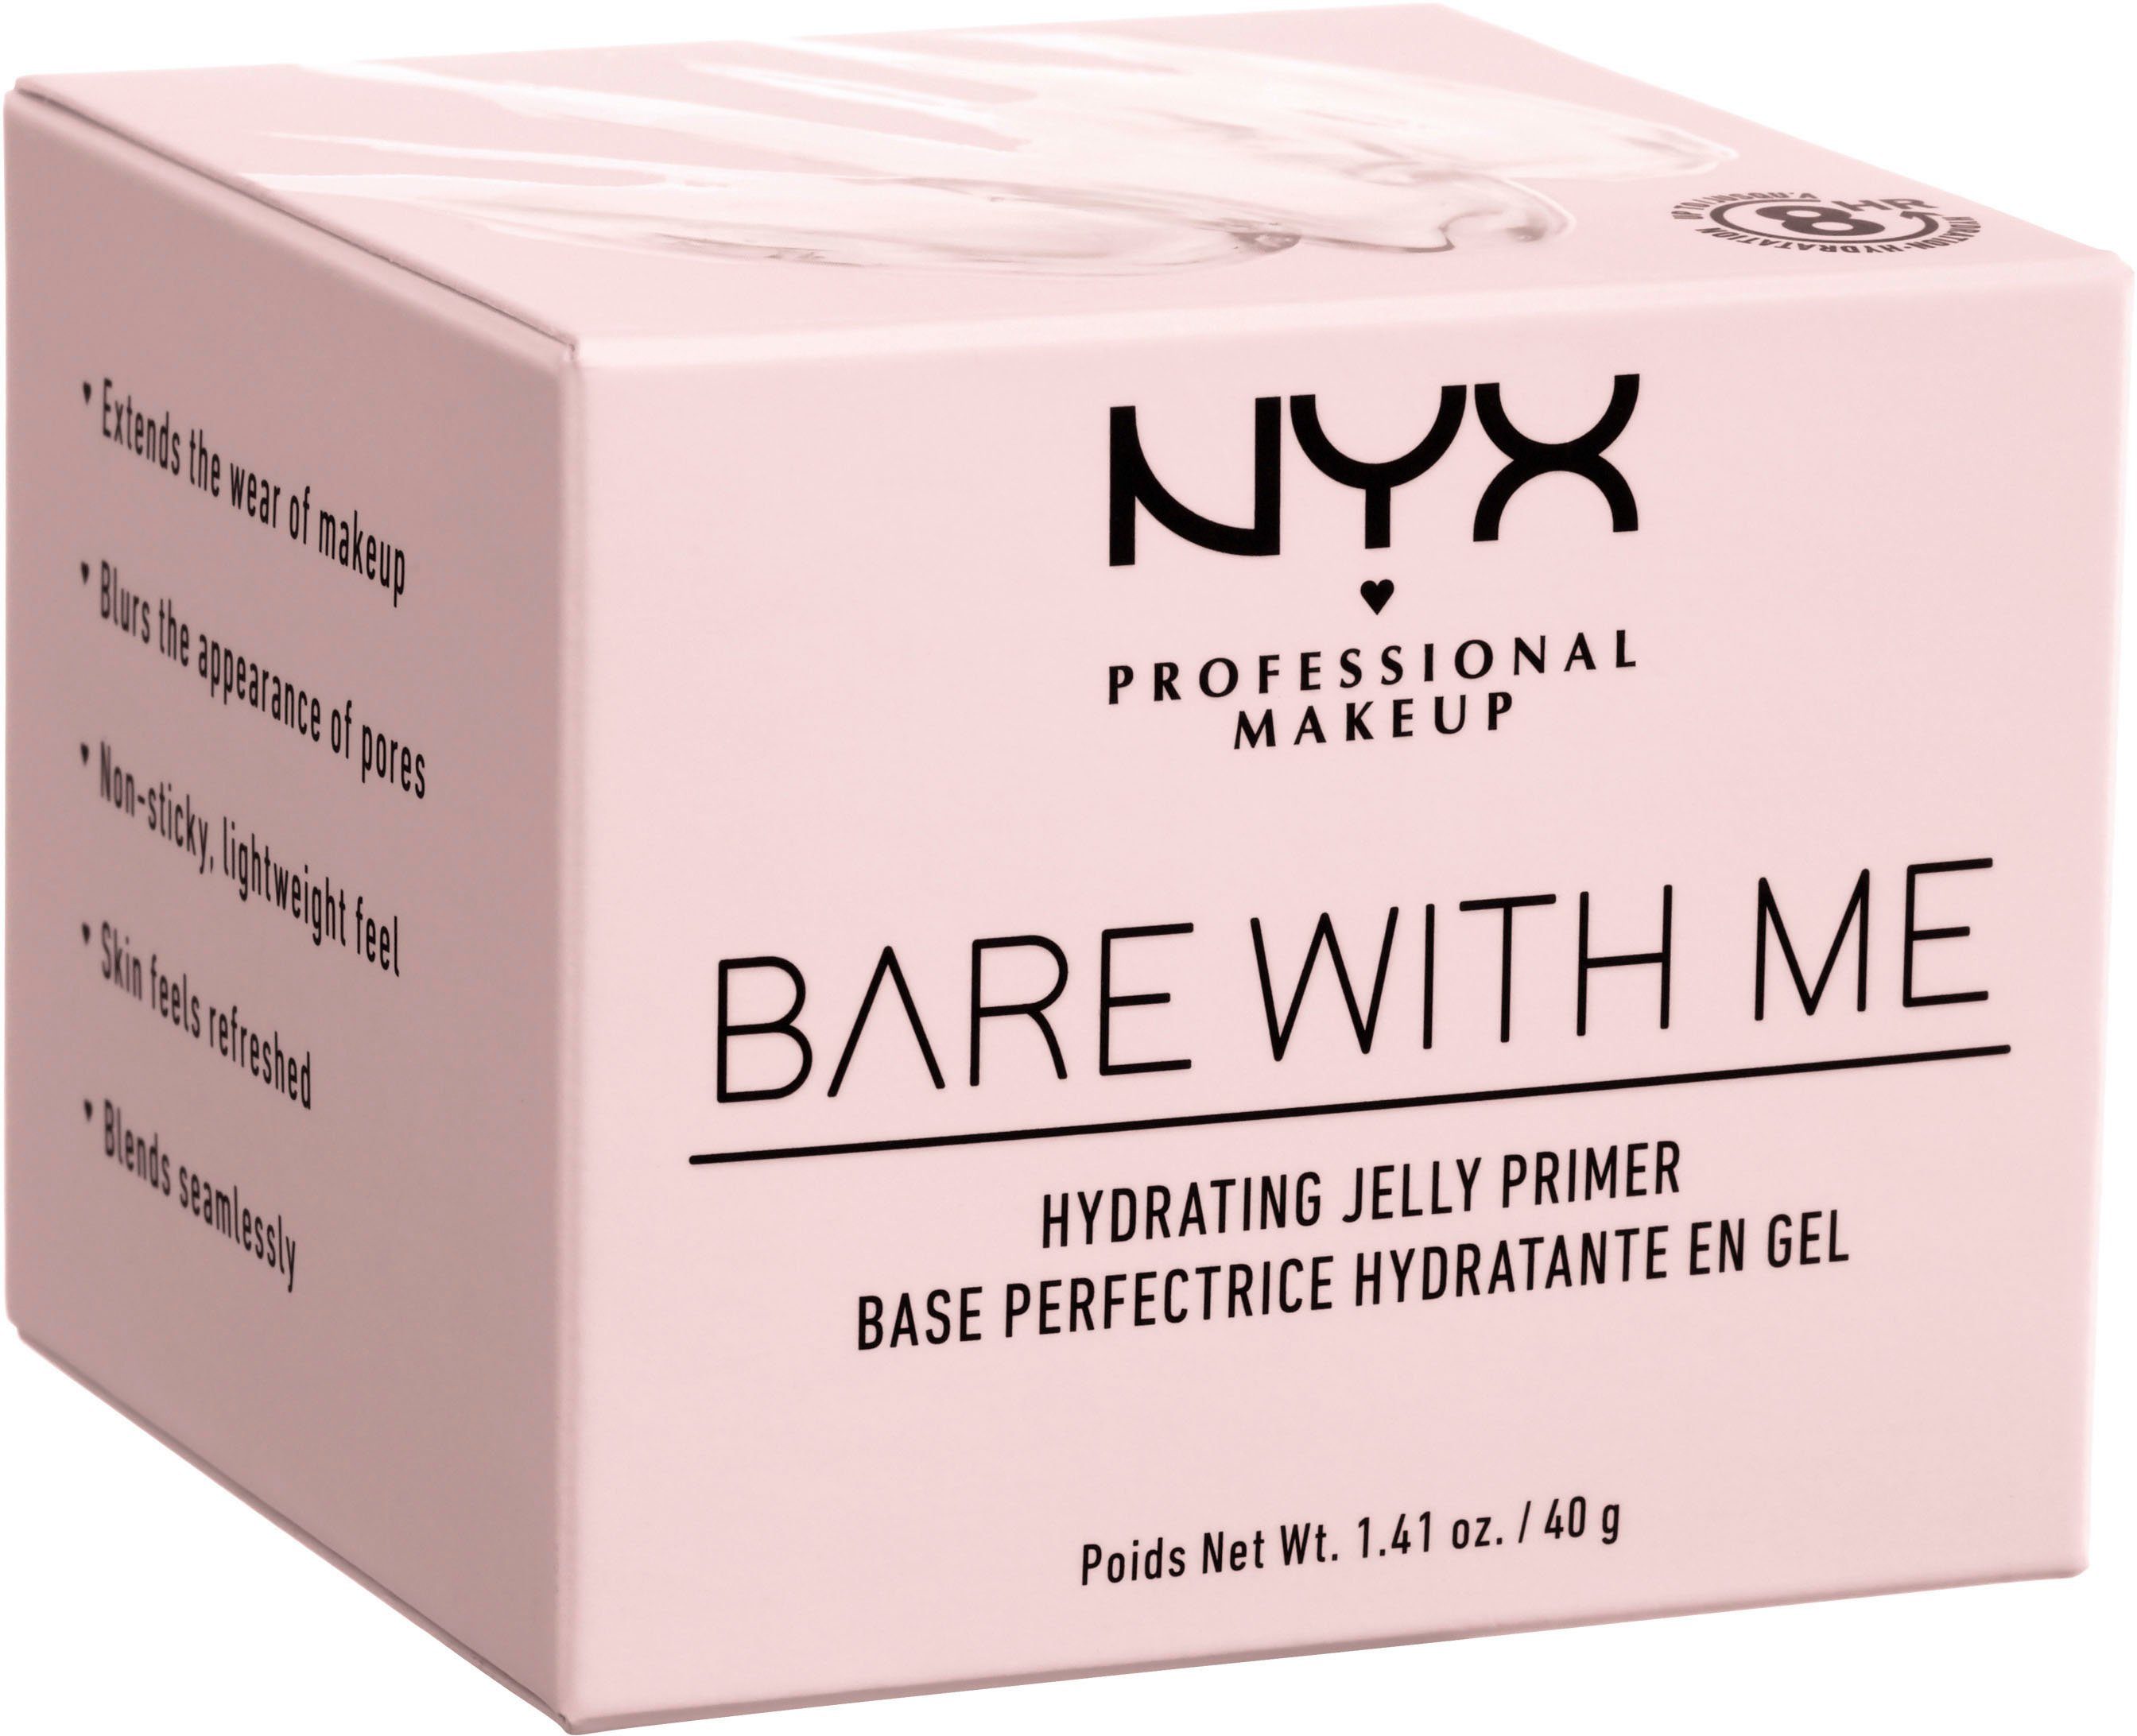 Primer Jelly Bare NYX Me NYX Hydrating Professional Makeup With Primer